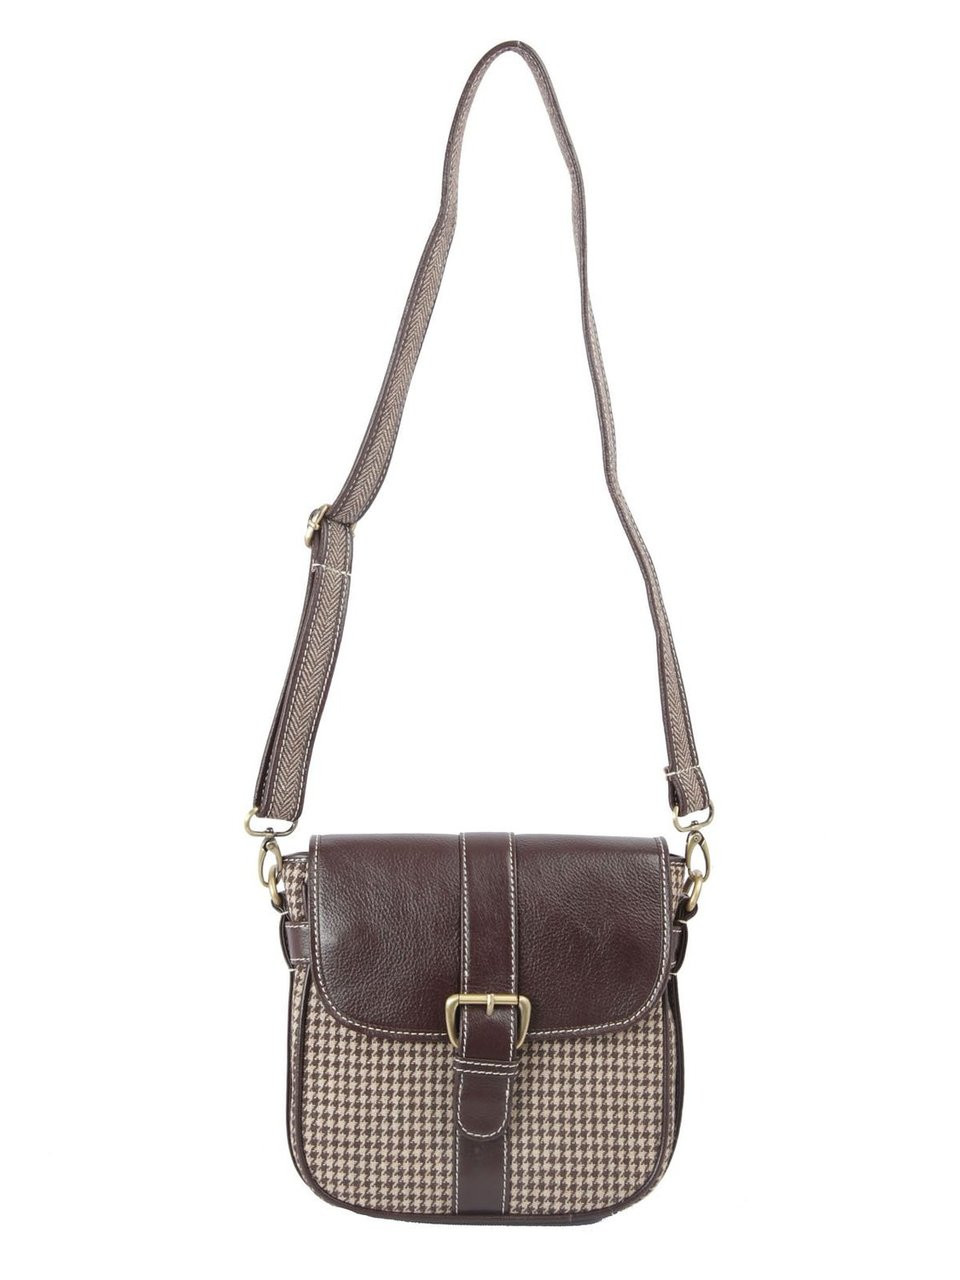 Ivory Tag Brown Leather & Houndstooth Crossbody Bag - In-Sattva